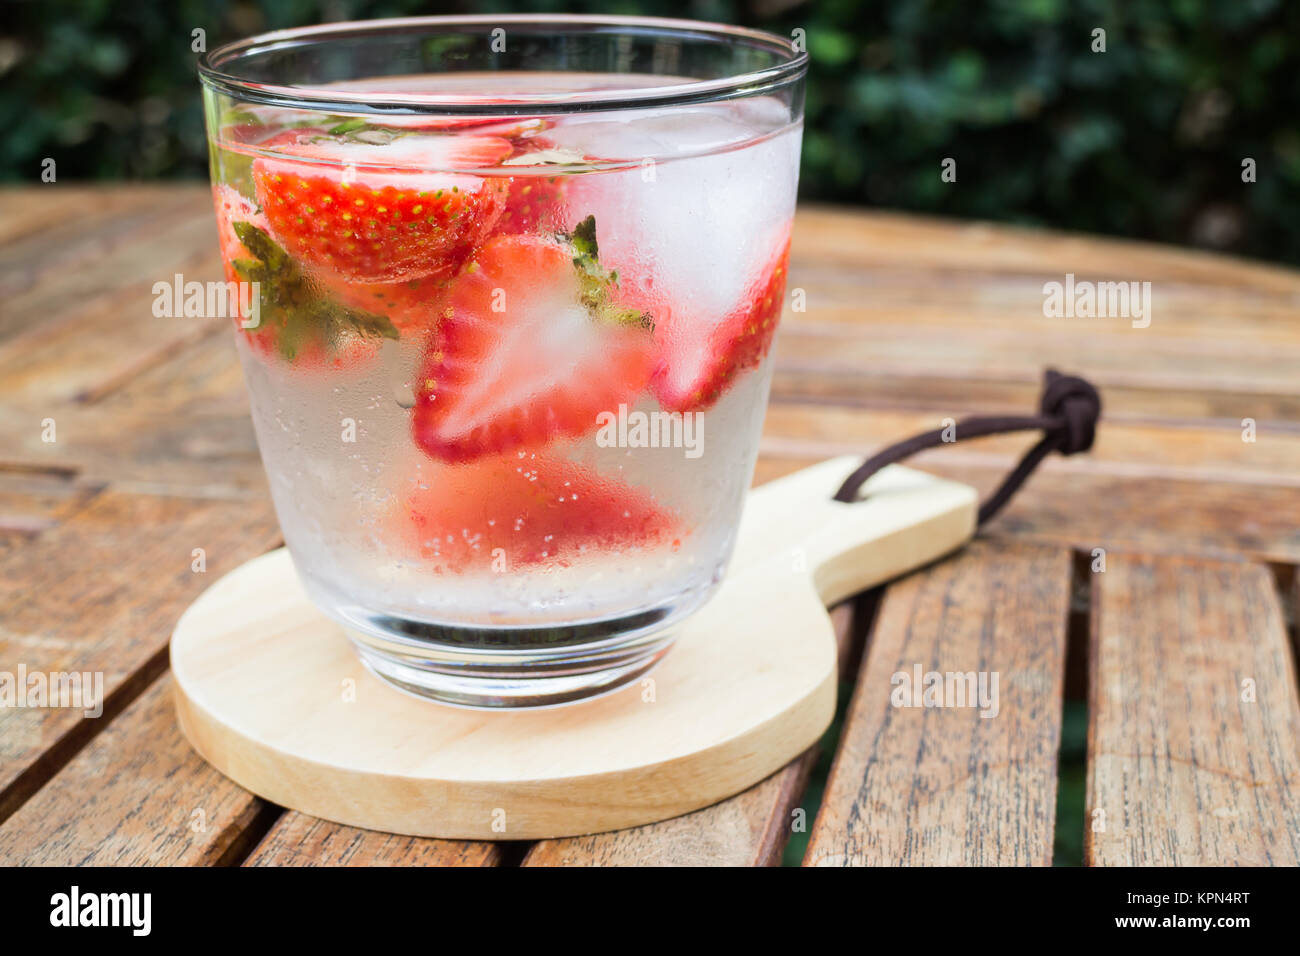 Close-up glass of strawberry infused water Stock Photo